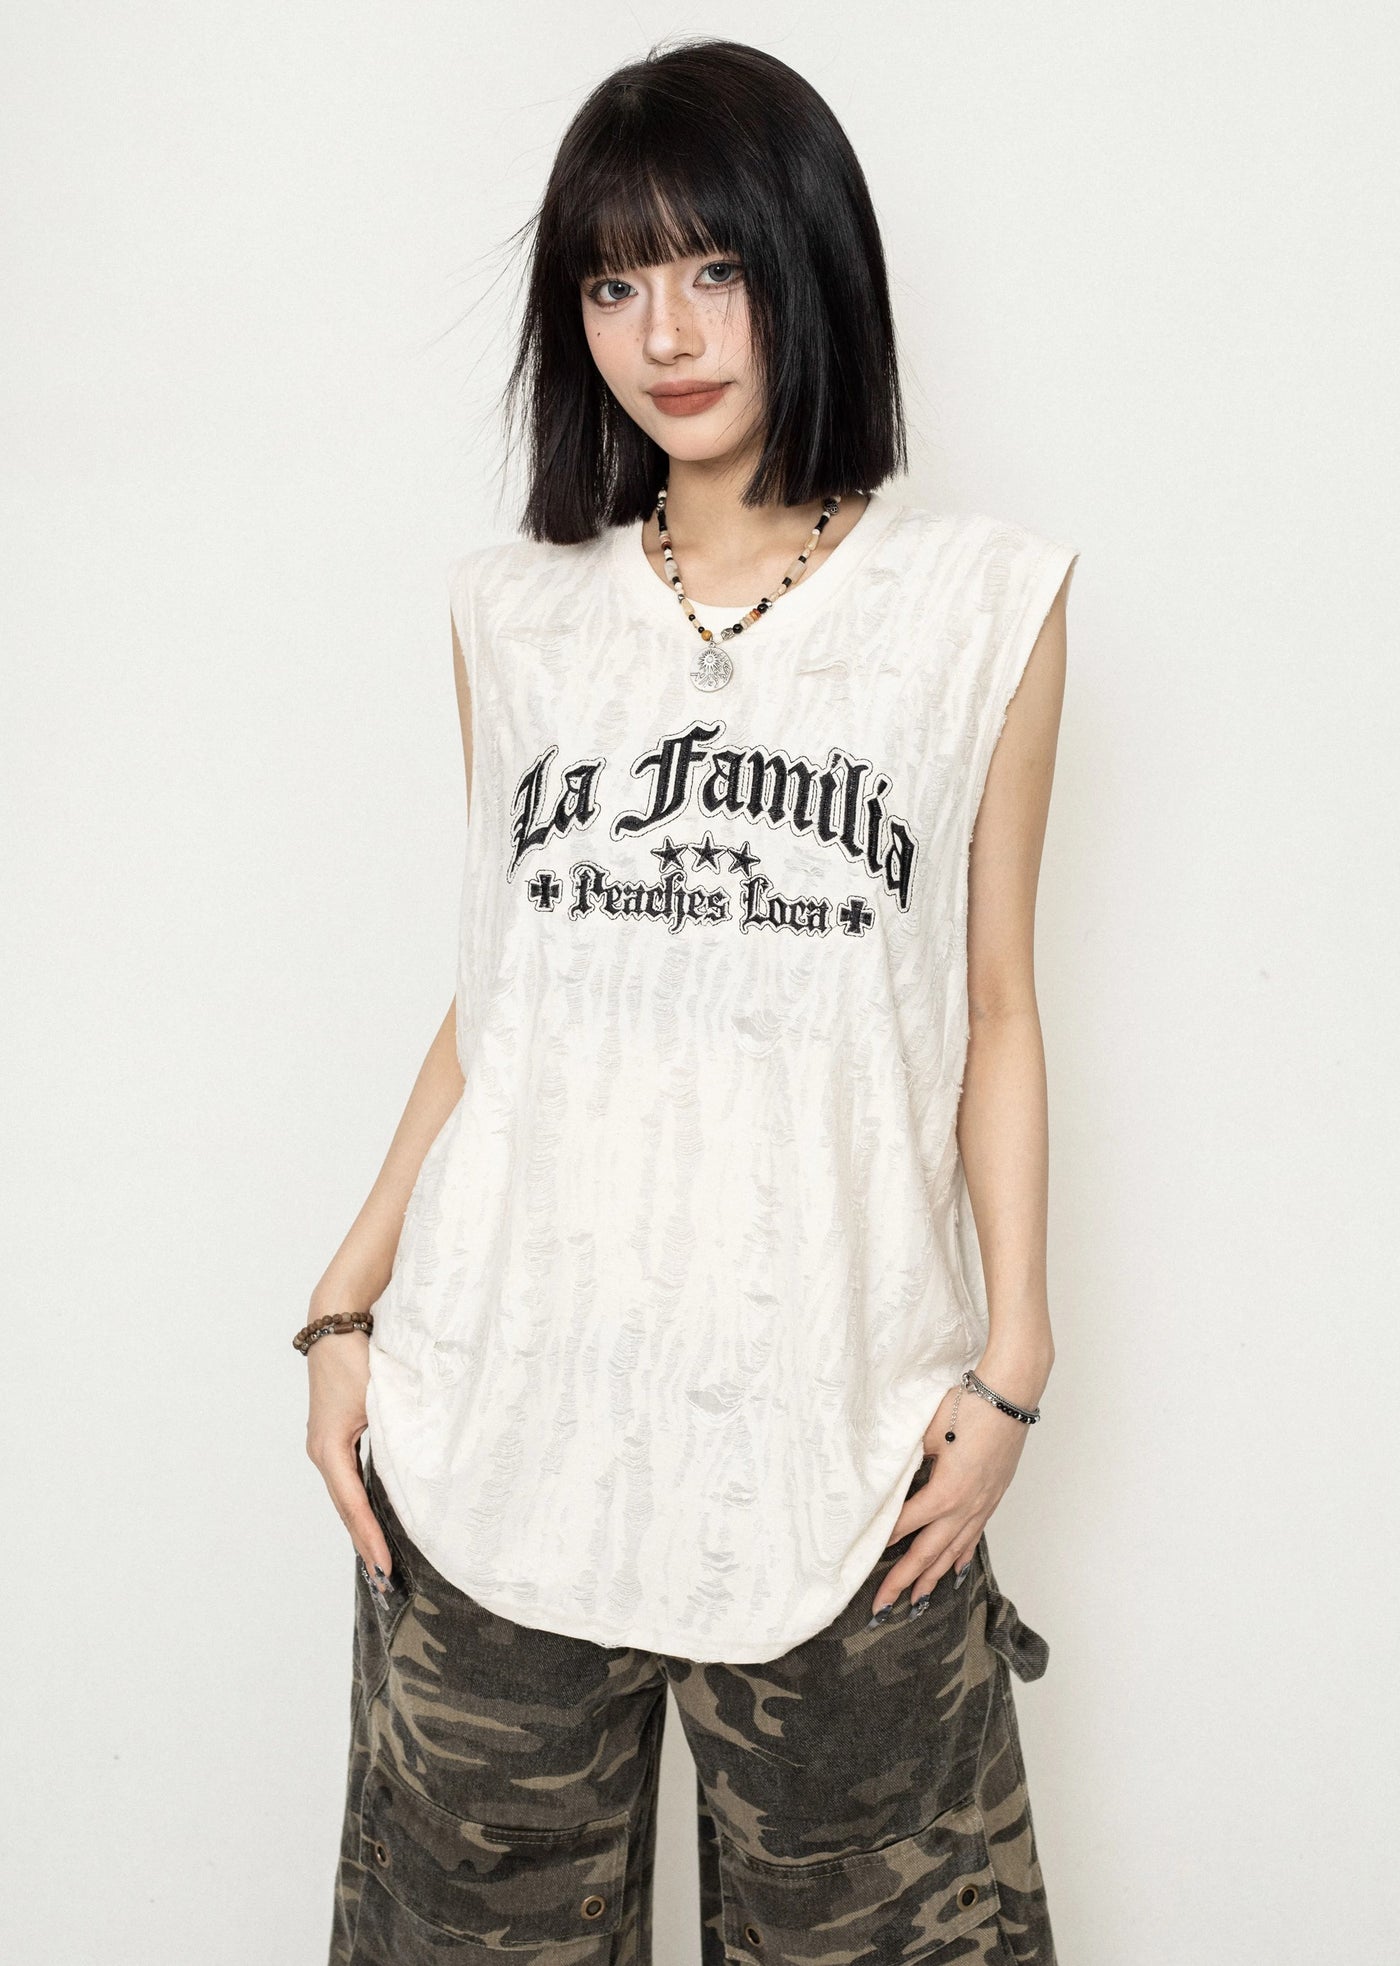 【ZERO STORE】All-over mid-distressed grunge style design sleeveless  ZS0038